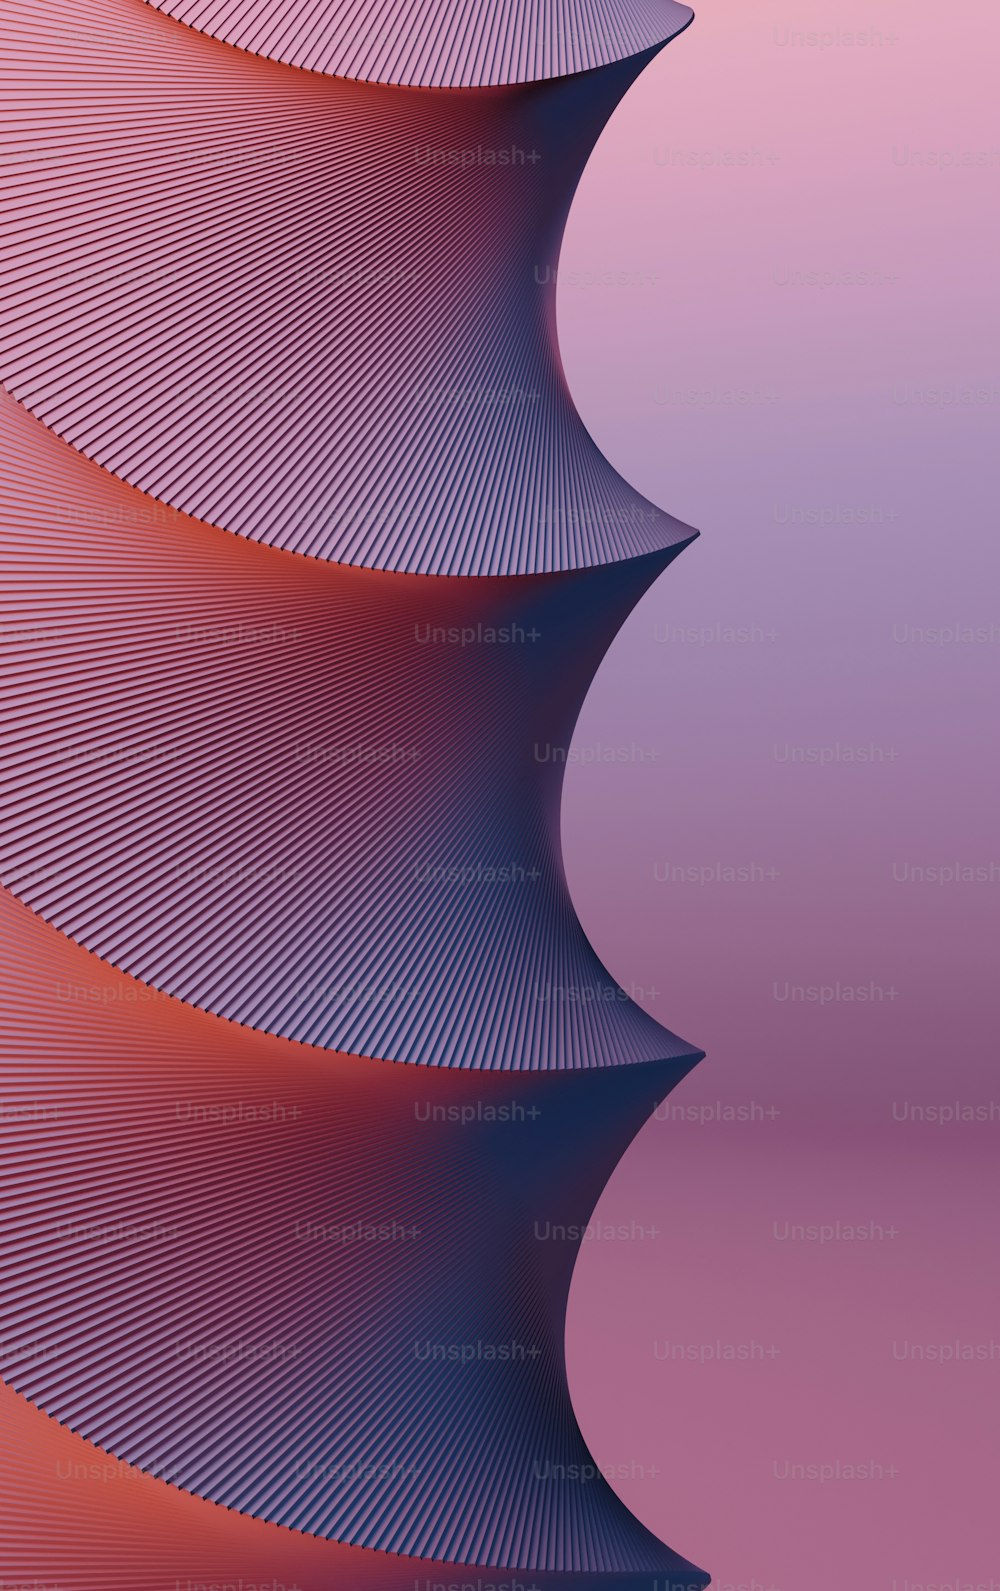 a purple and pink background with wavy lines